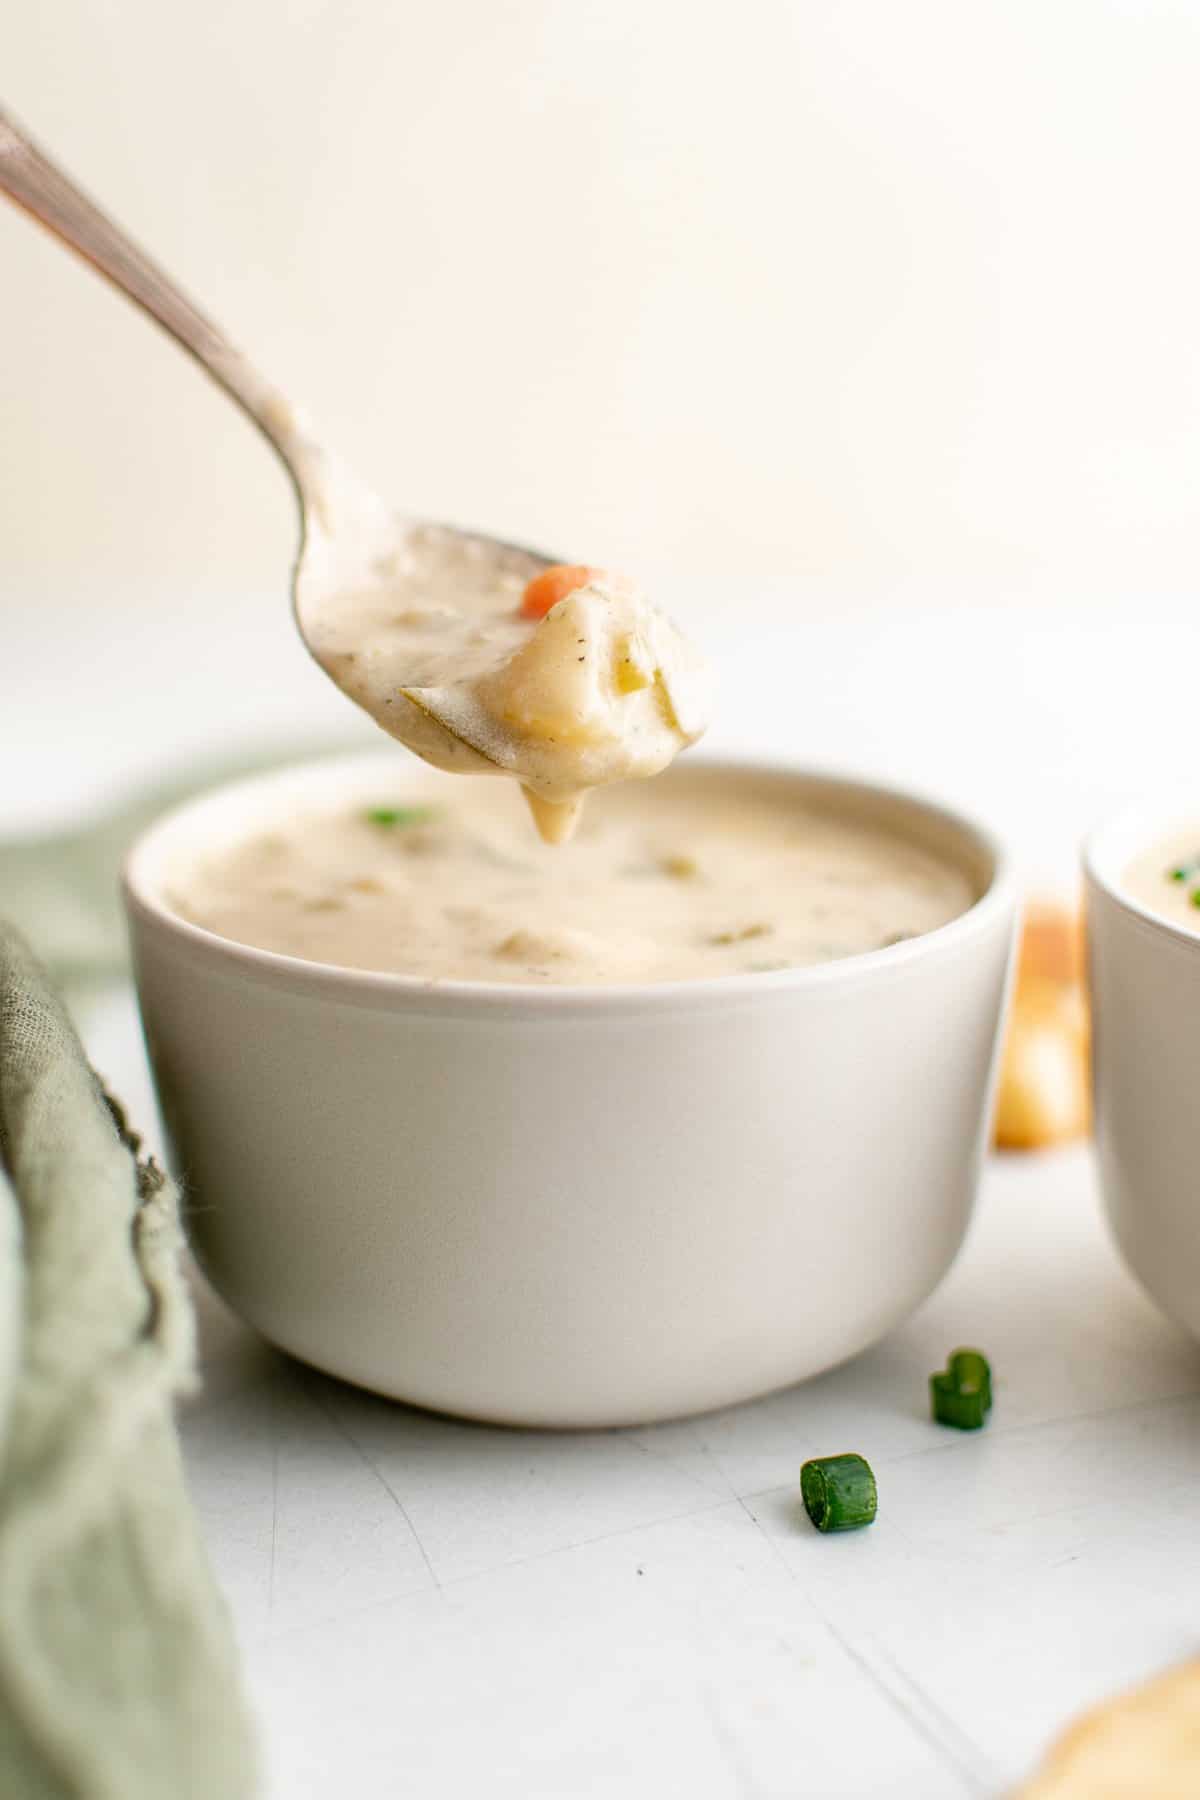 a white bowl full of creamy soup, garnished with green onions and served with bread